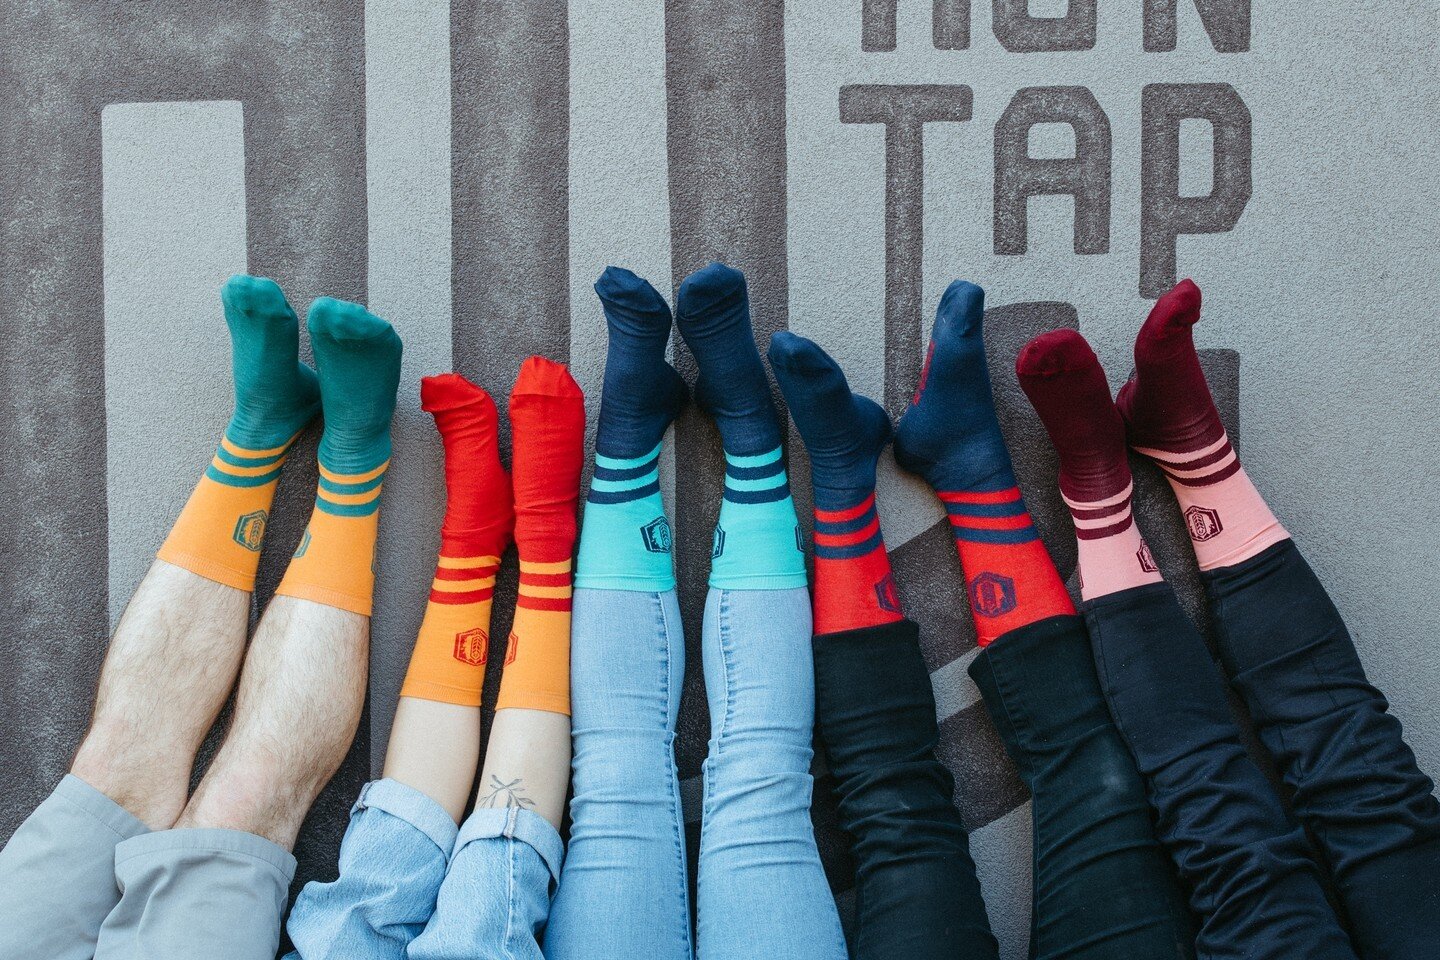 If you need to class up your sock game, we&rsquo;ve got you covered. ⁠
Your feet* We&rsquo;ve got your feet covered*⁠
⁠
#sweetdadjokes #bunkergear #cleveras⁠
⁠
⁠
⁠
⁠
⁠
⁠
⁠
⁠
⁠
⁠
⁠
⁠
⁠
⁠
⁠
#fhkt2022 #heritage #beer #foodie #yummy #tasty #eatlocal #dri